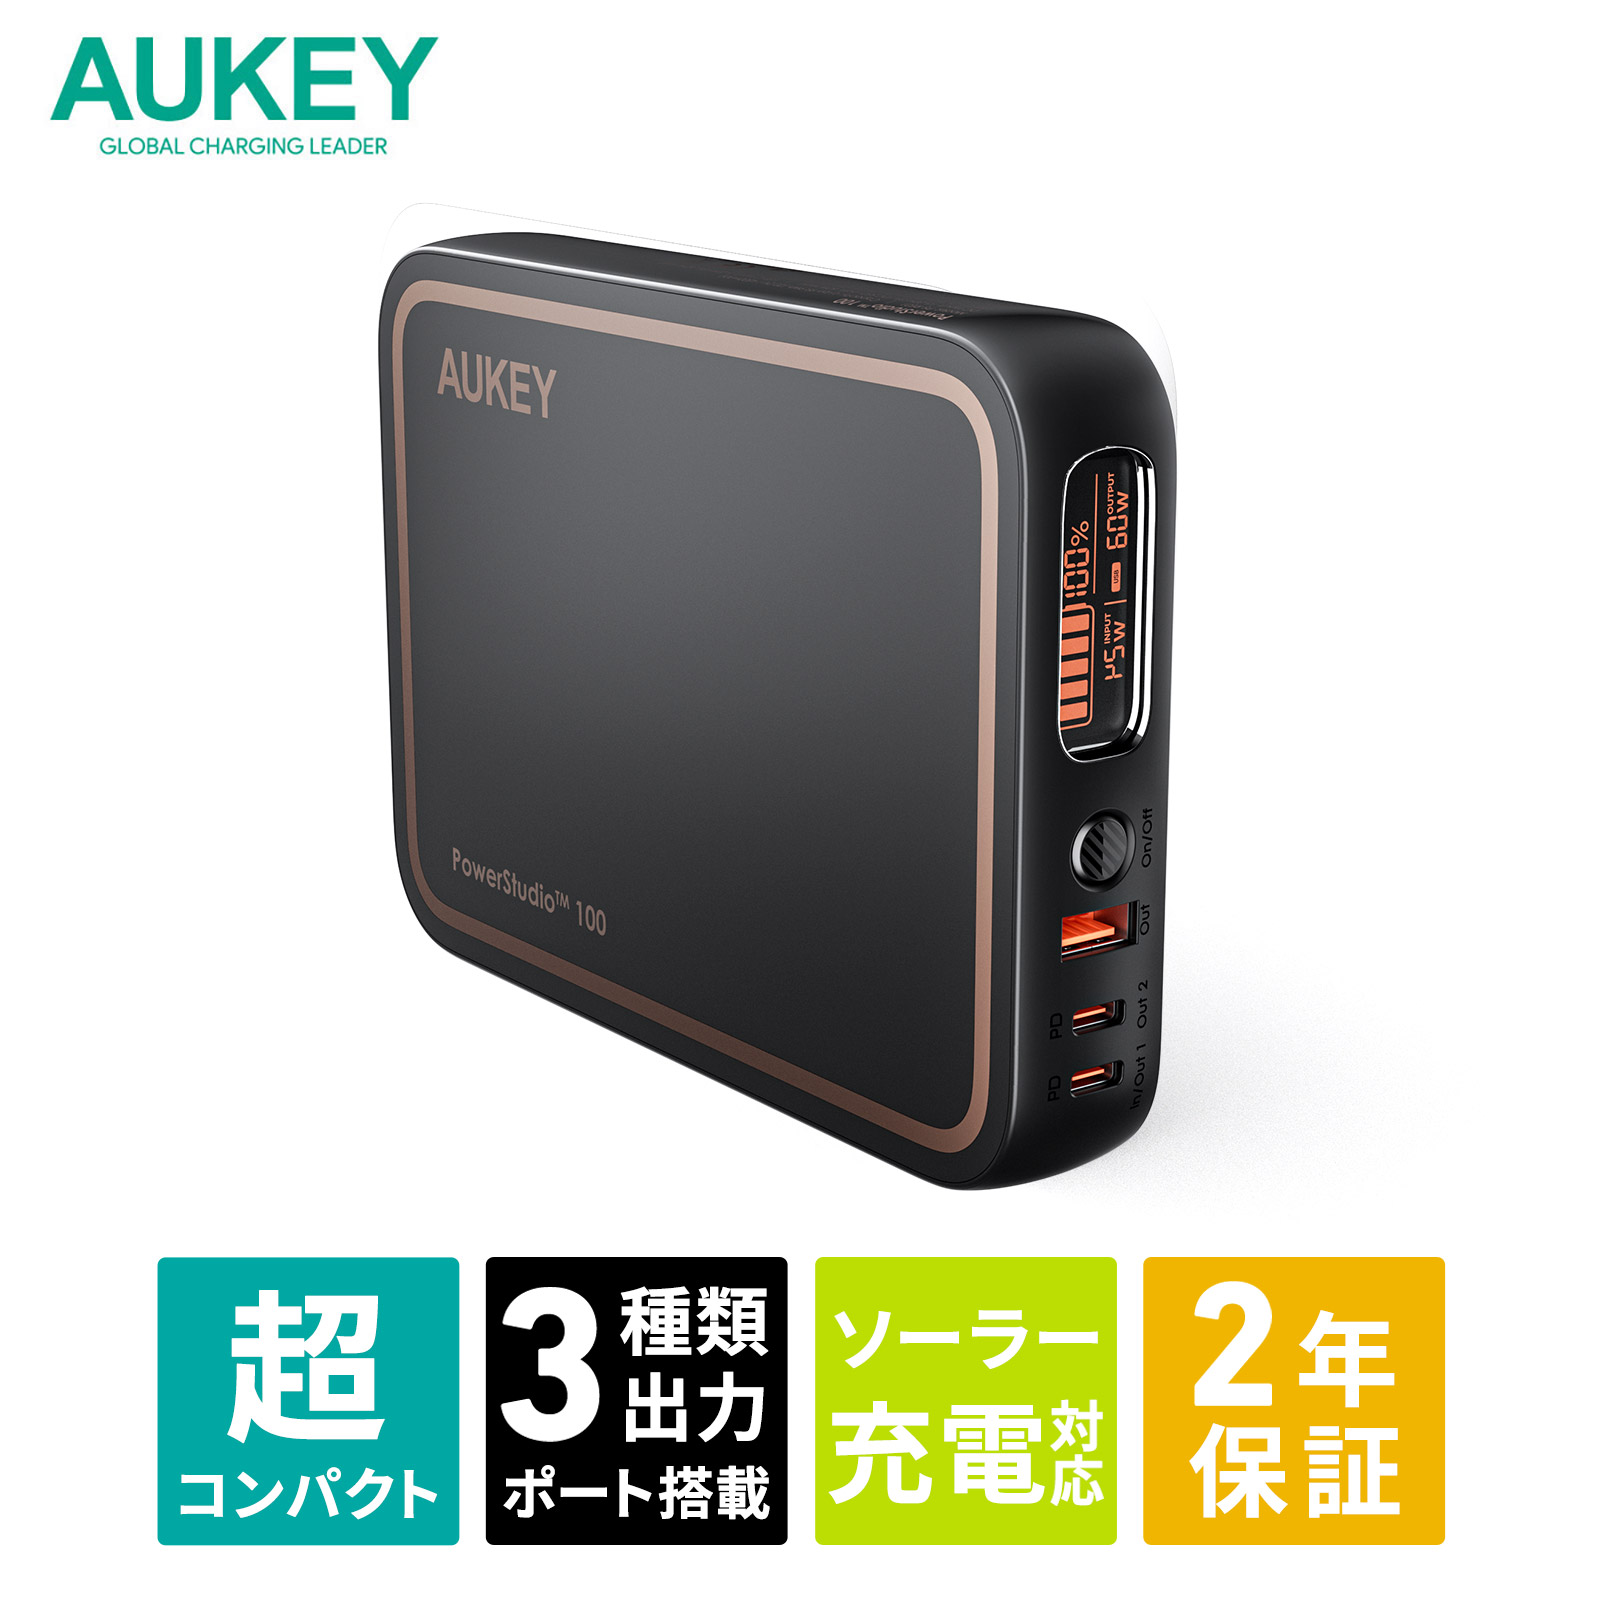 AUKEY ポータブル電源 コンパクト 100Wh 27000mAh PowerStudio 100 PS